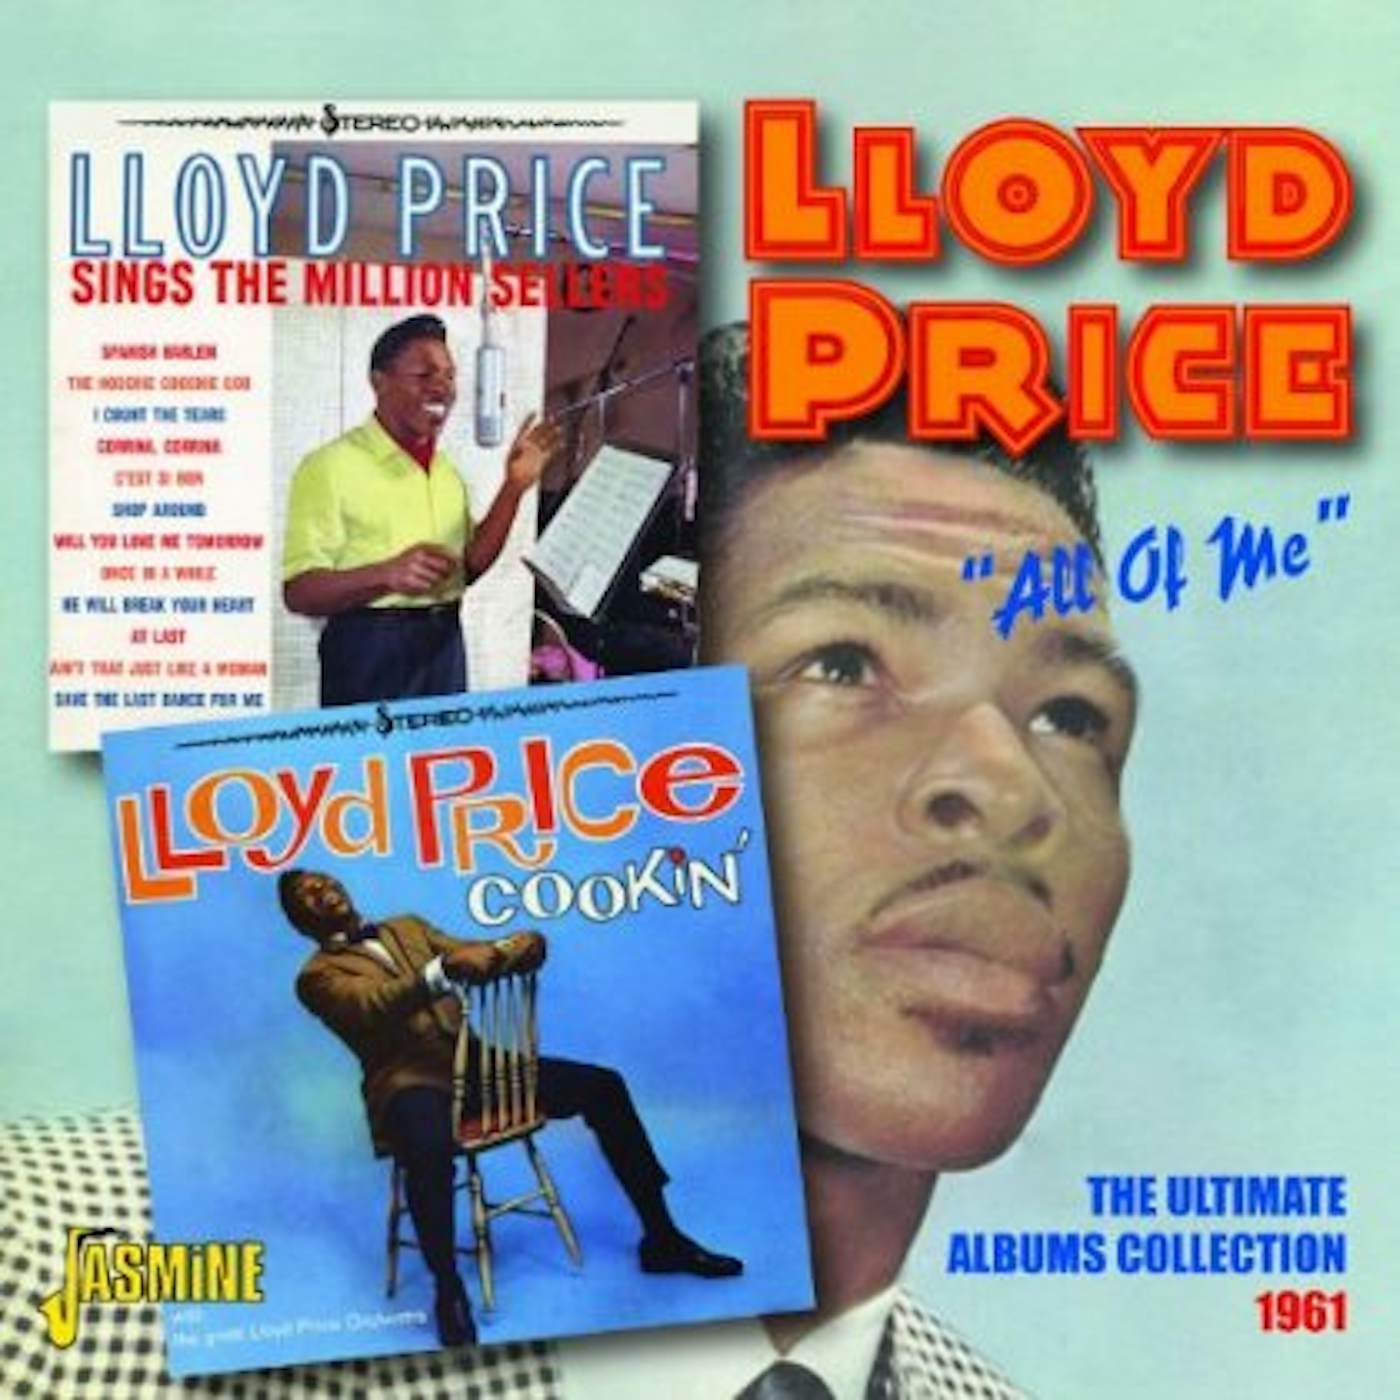 Lloyd Price ALL OF ME: ULTIMATE ALBUMS COLLECTION 1961 CD